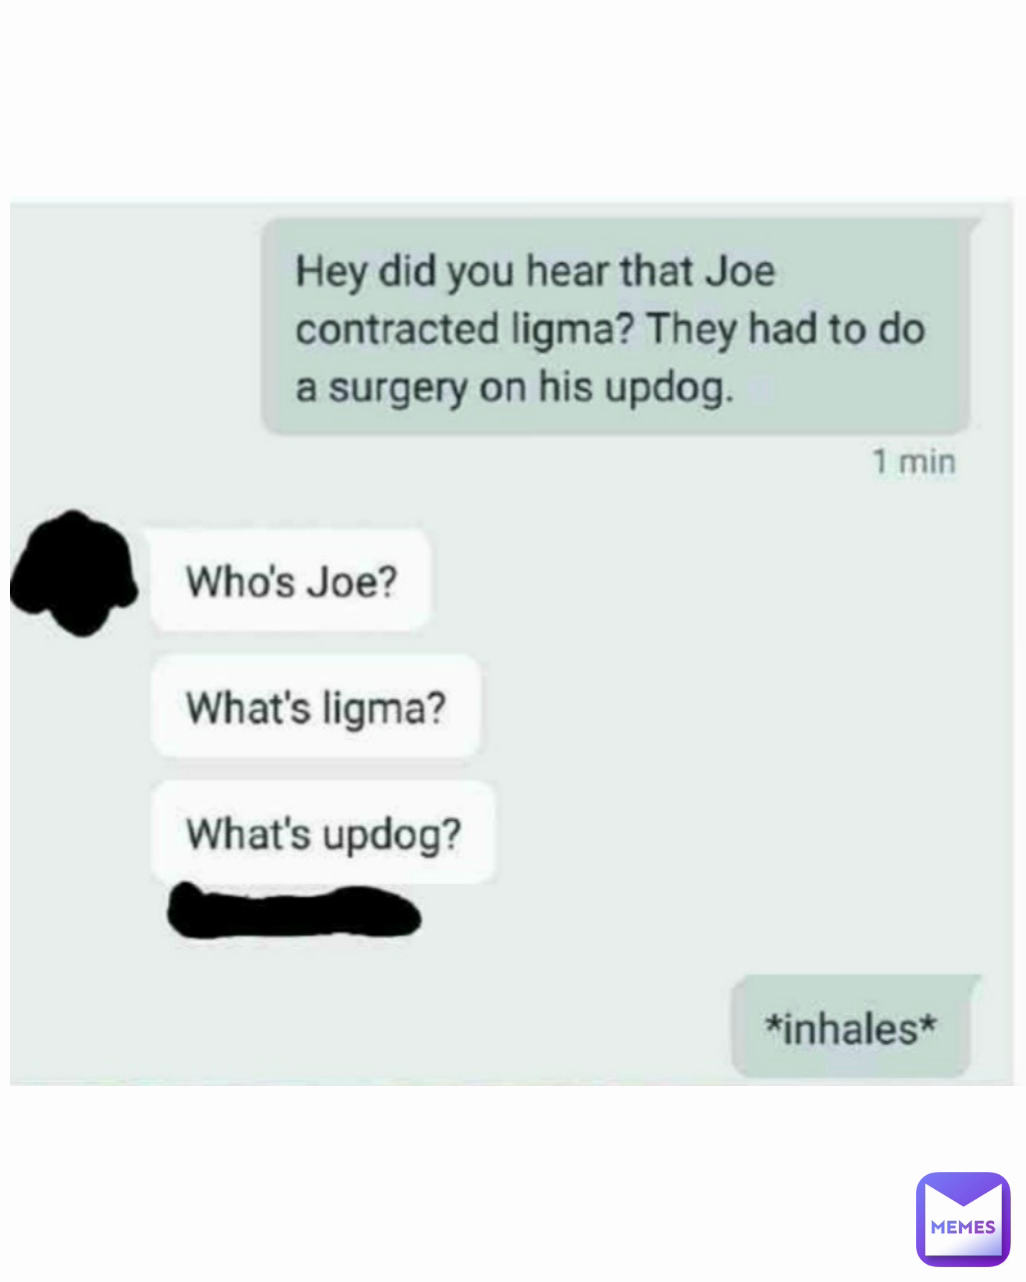 Hey did you hear that Joe contracted ligme? They had to do surgery